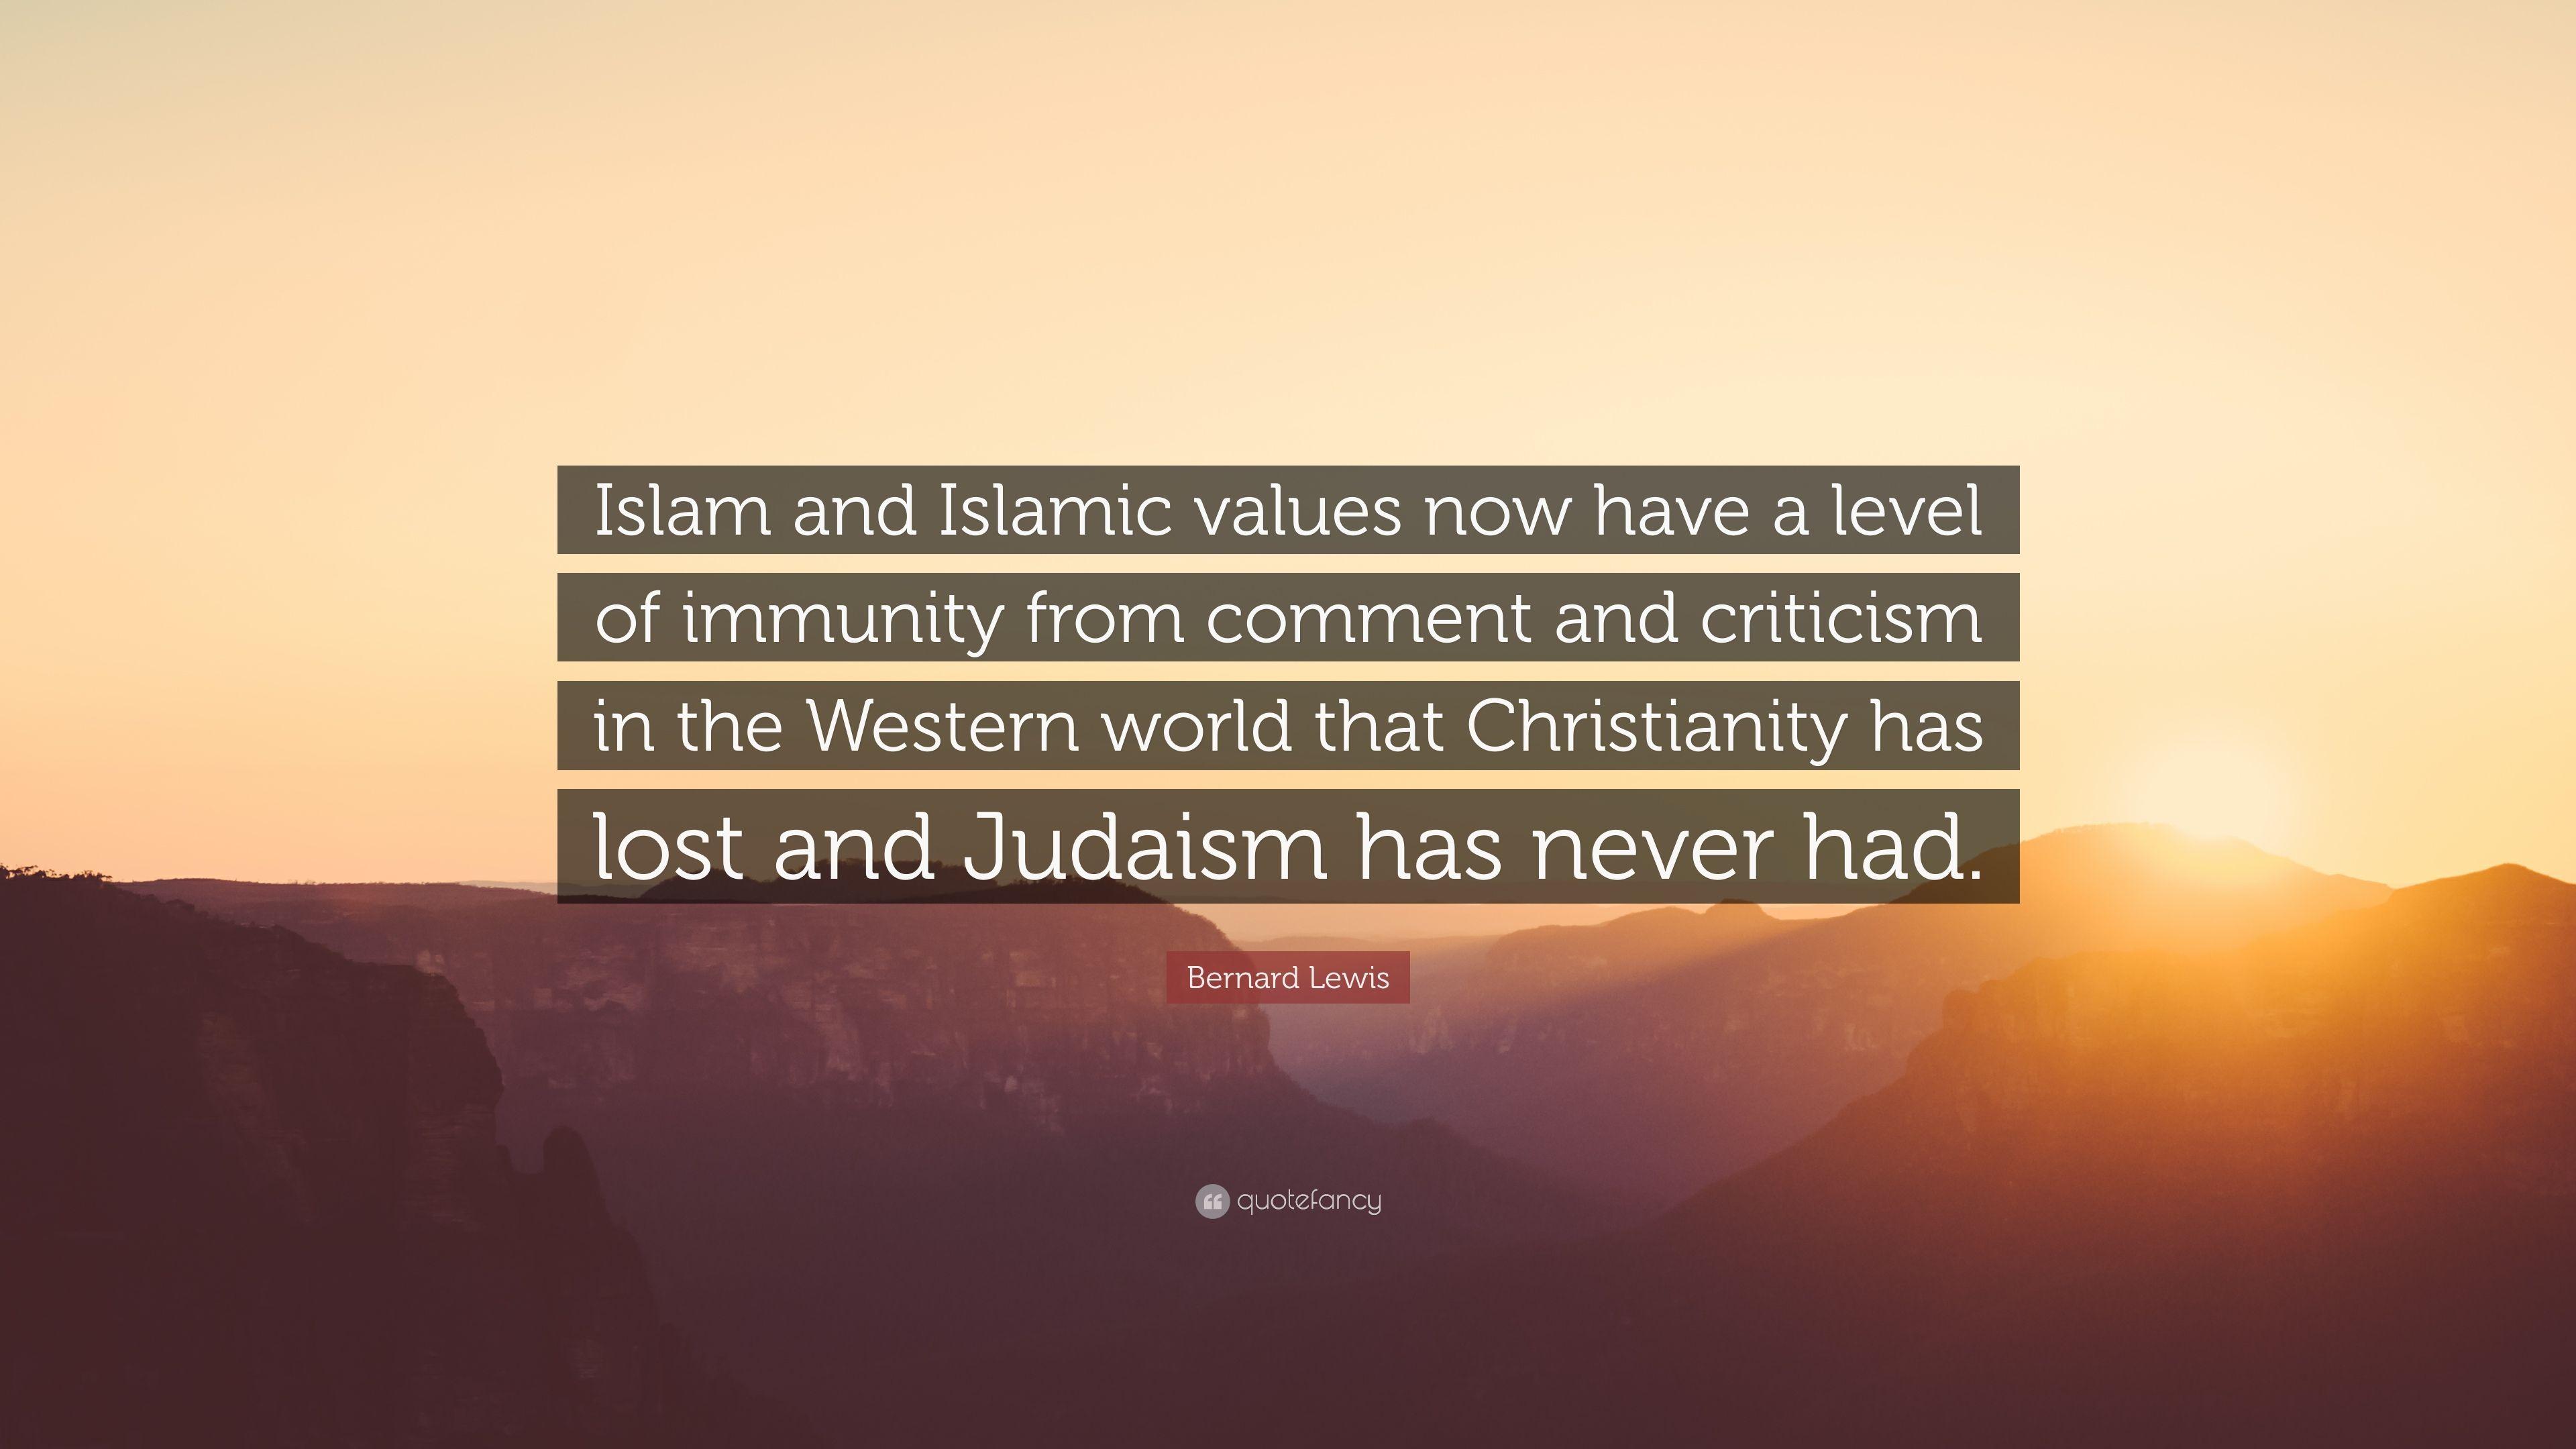 Bernard Lewis Quote: “Islam and Islamic values now have a level